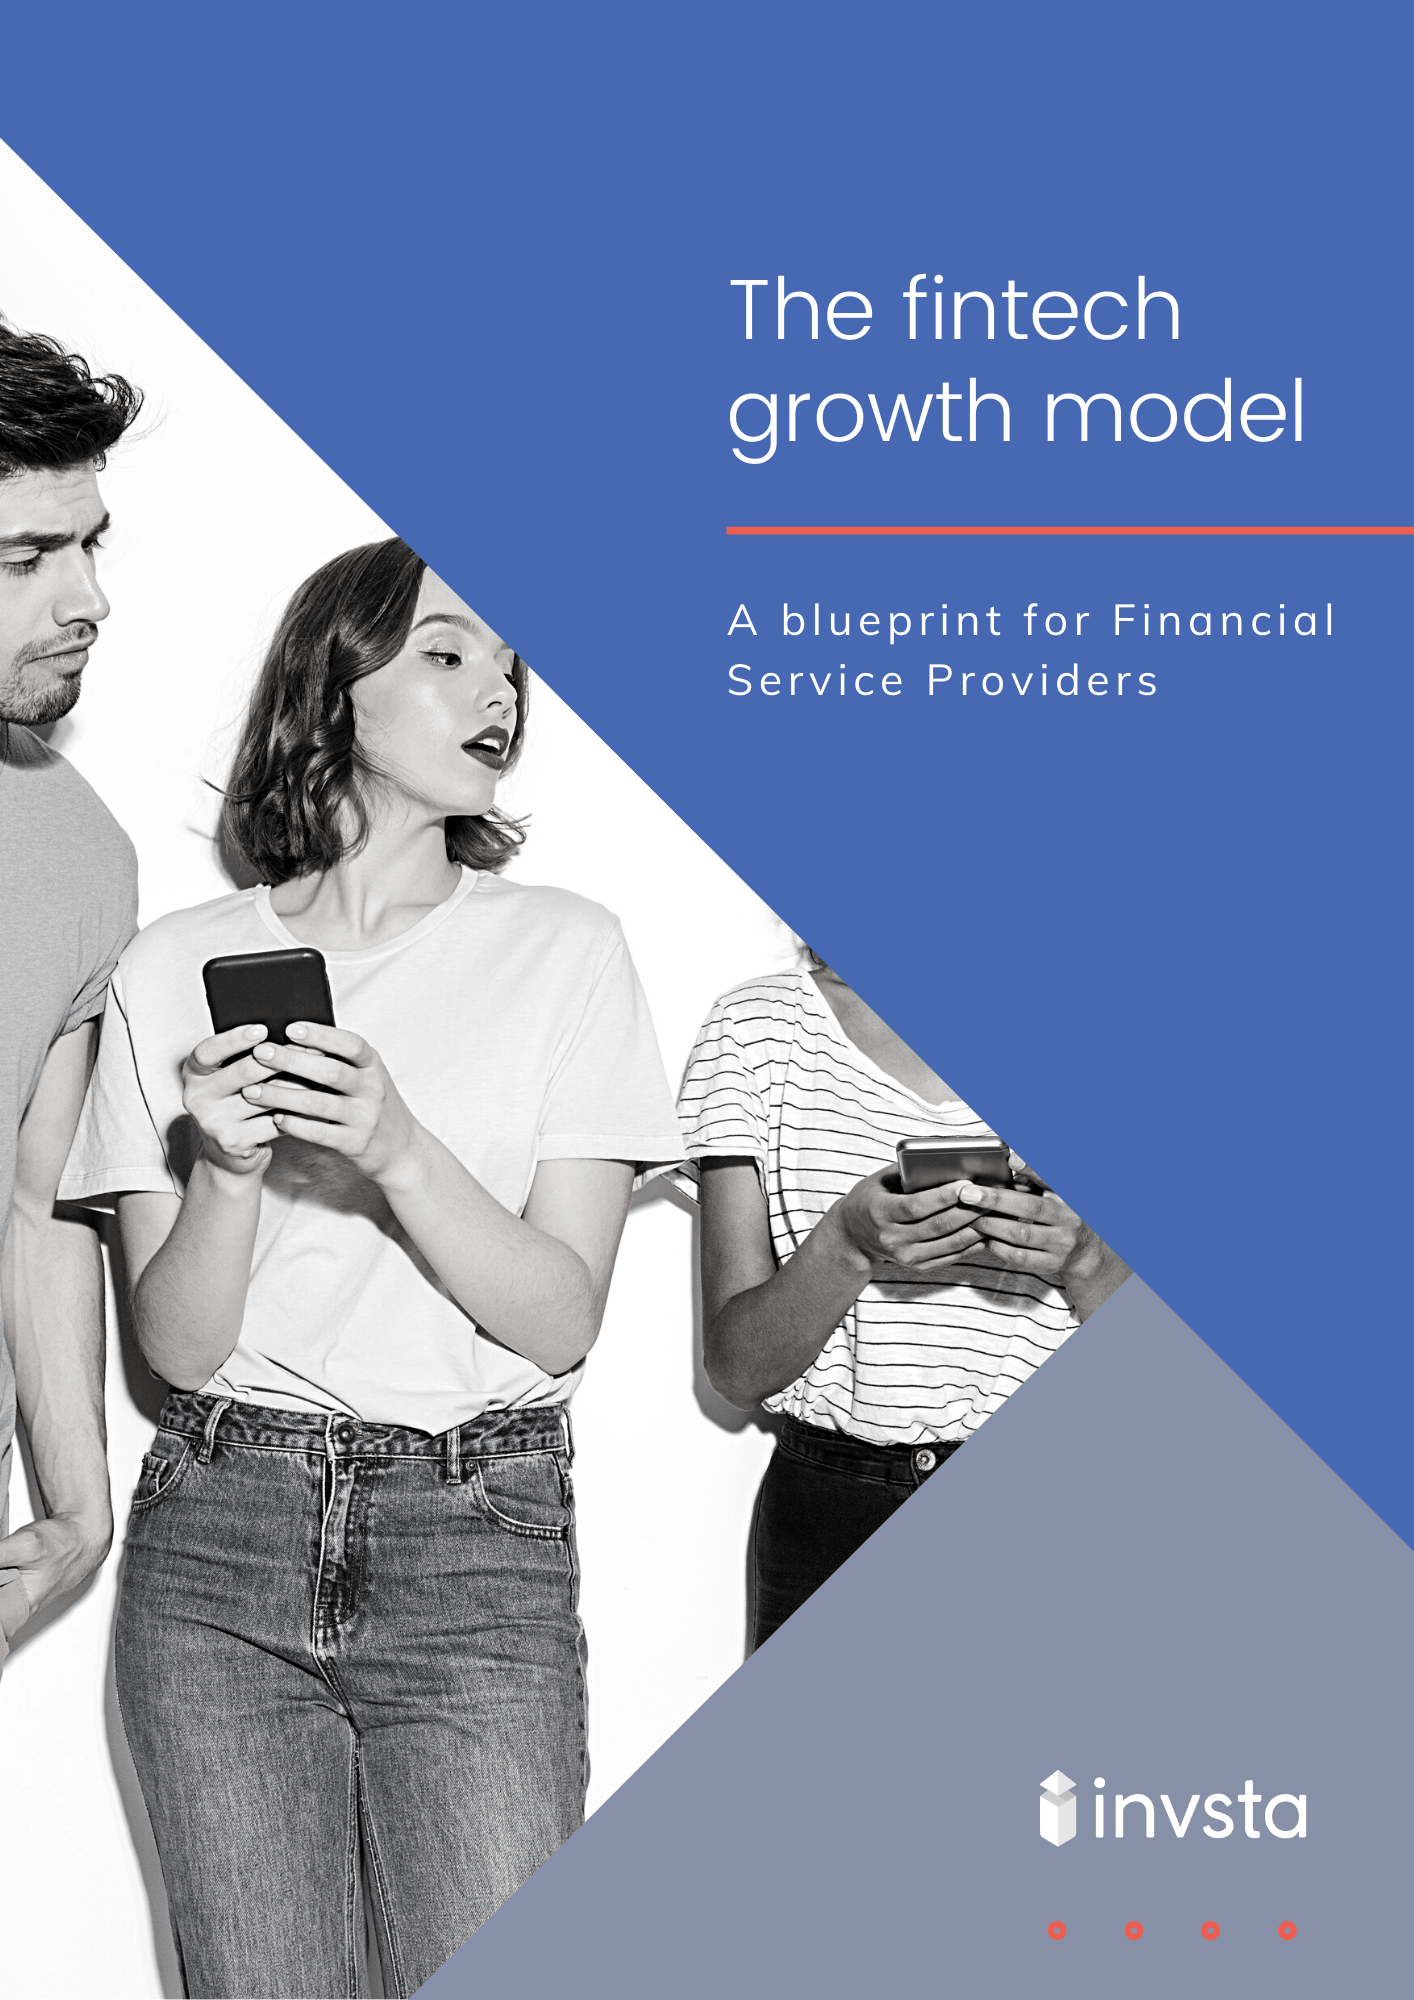 The fintech growth model A blueprint for Financial Service Providers v2-min